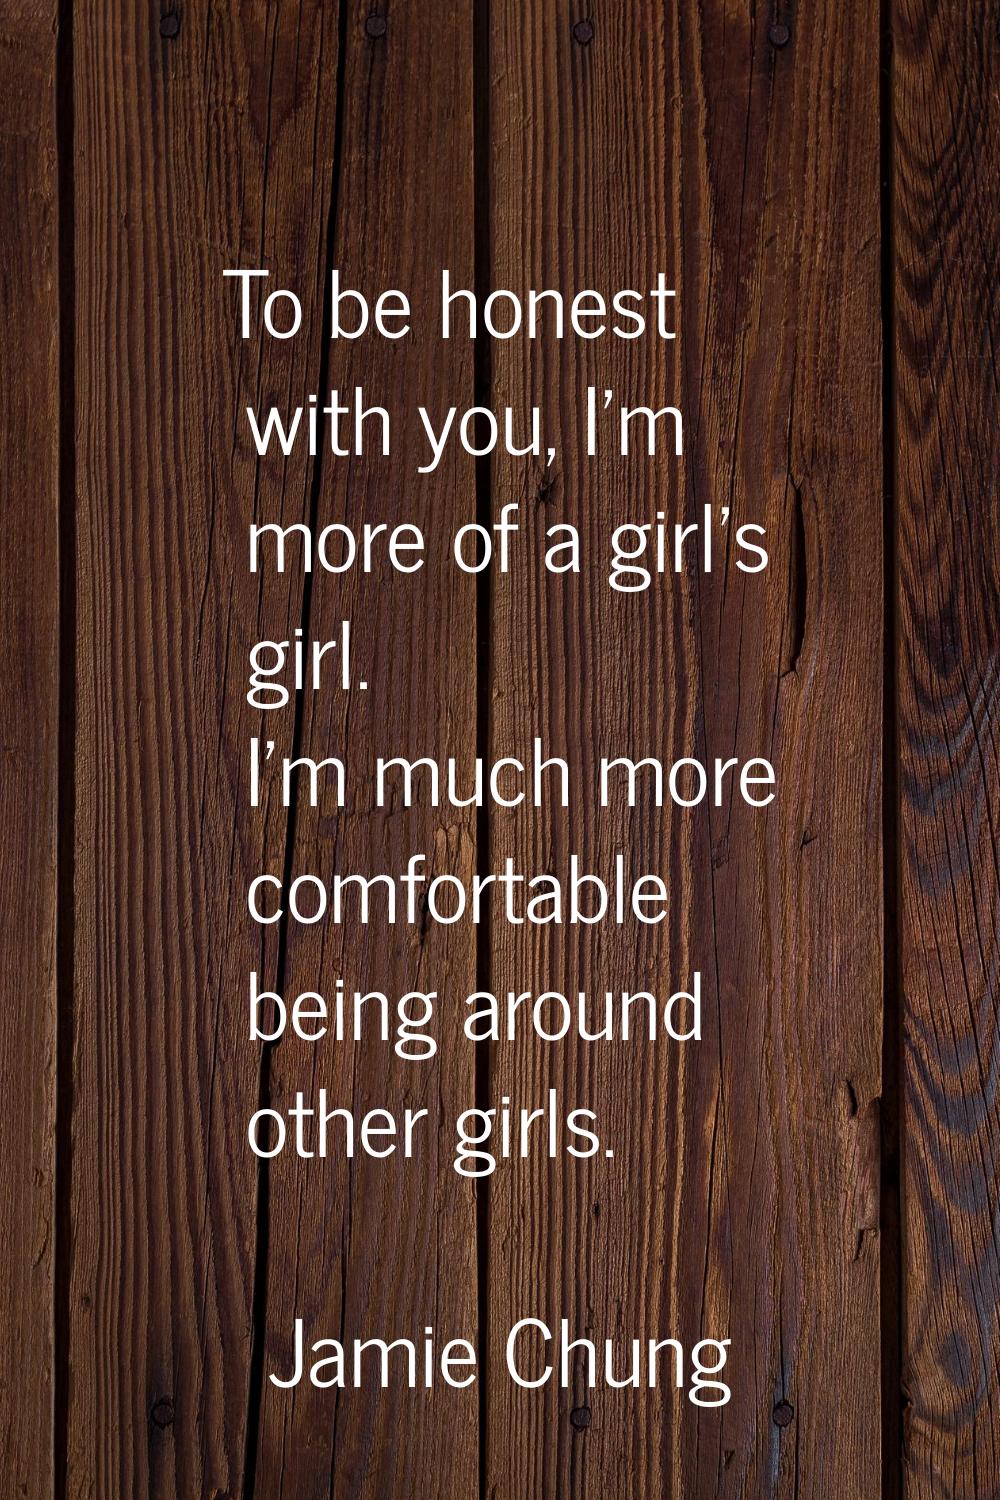 To be honest with you, I'm more of a girl's girl. I'm much more comfortable being around other girl